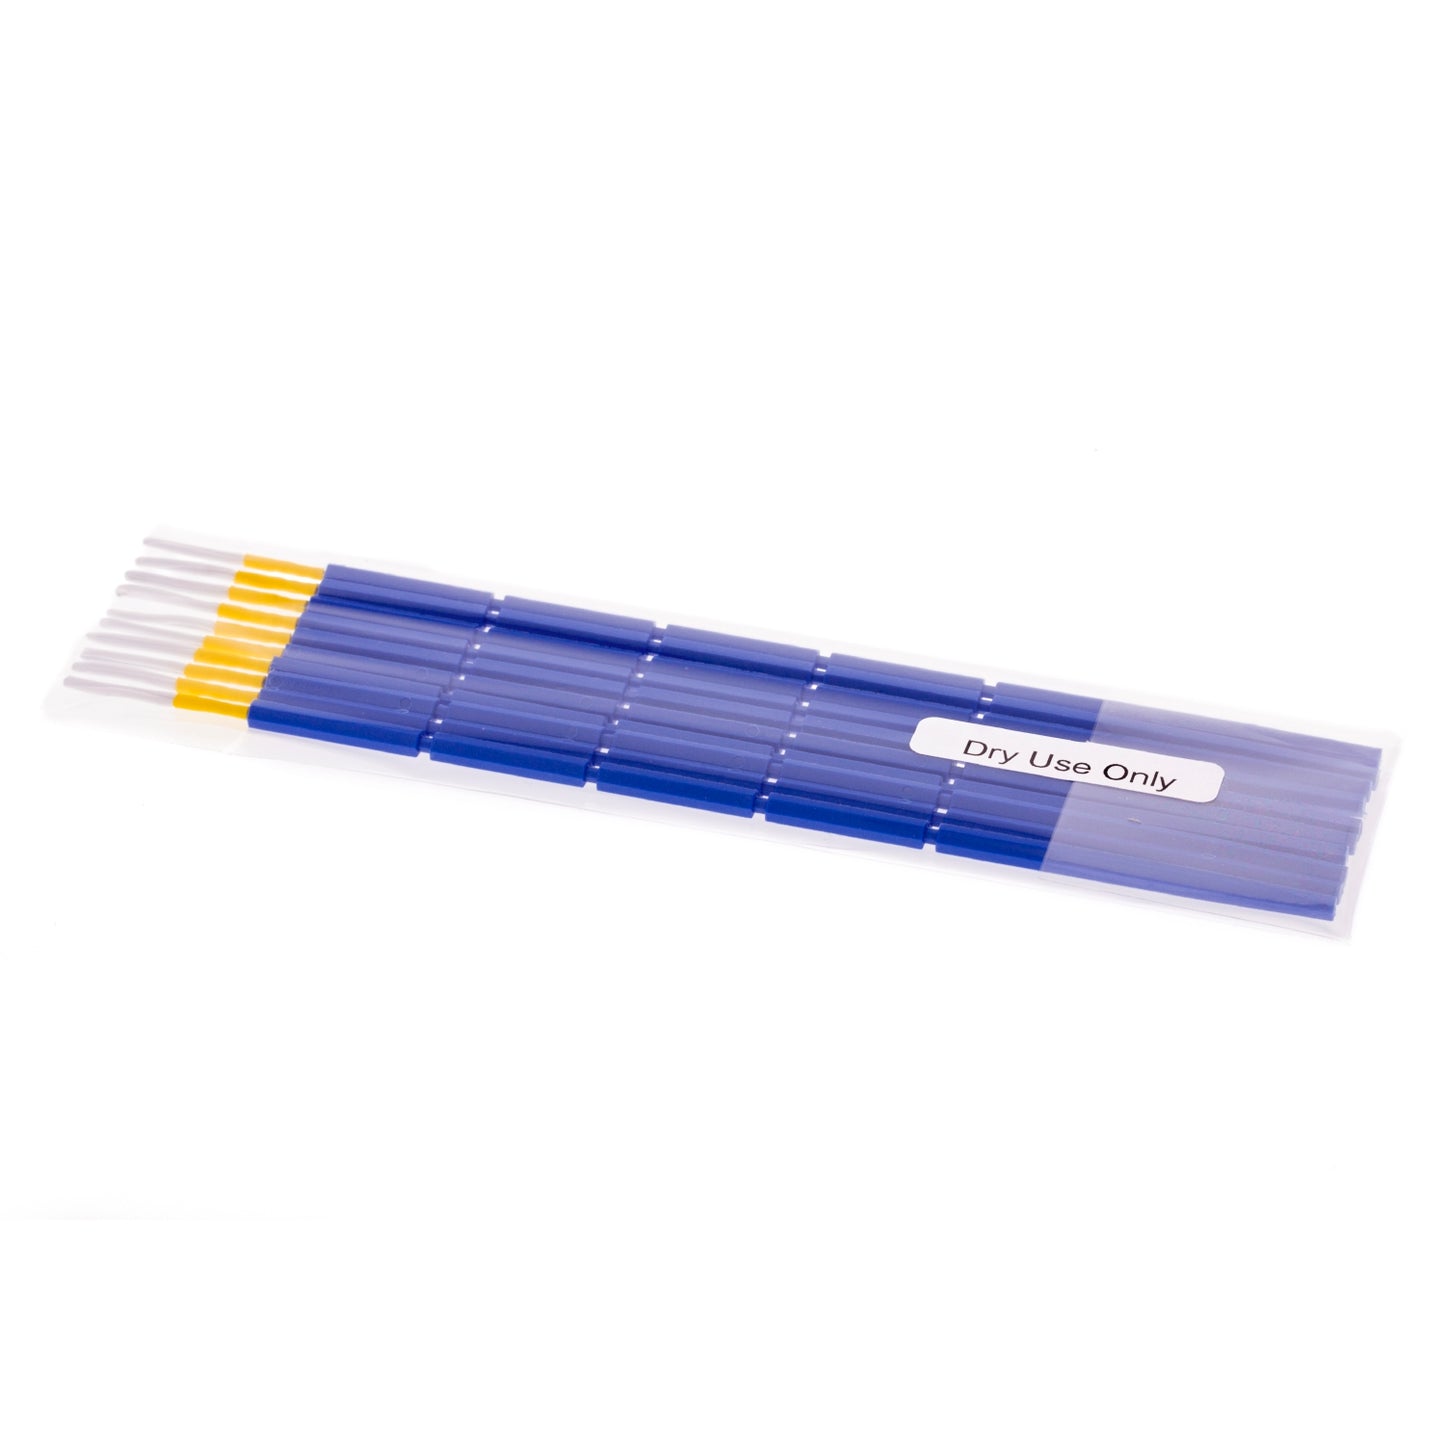 Package of 200 cleaning swabs for 1.25 mm ferrule